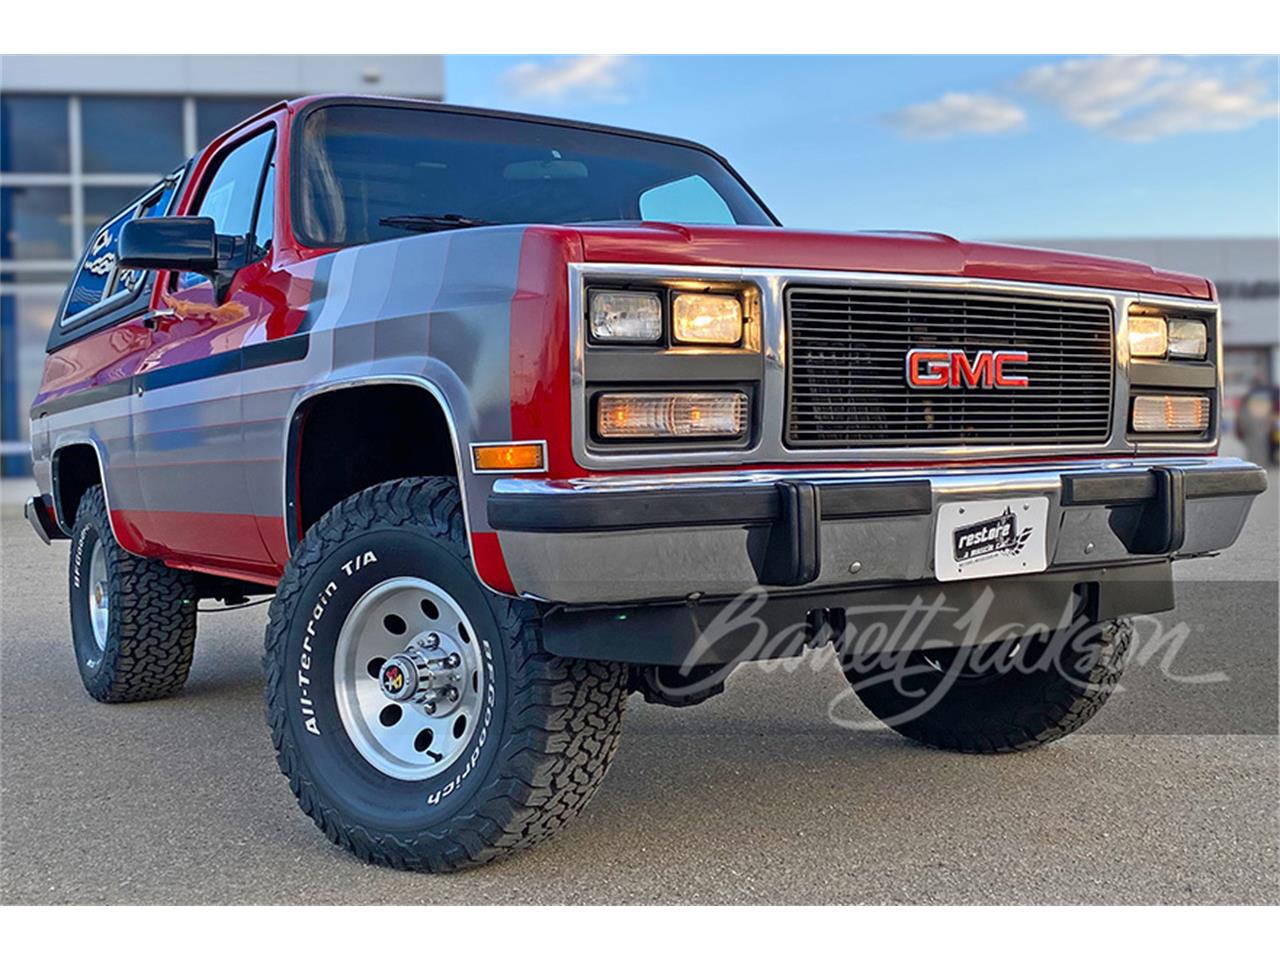 For Sale at Auction: 1991 GMC Jimmy in Scottsdale, Arizona for sale in Scottsdale, AZ